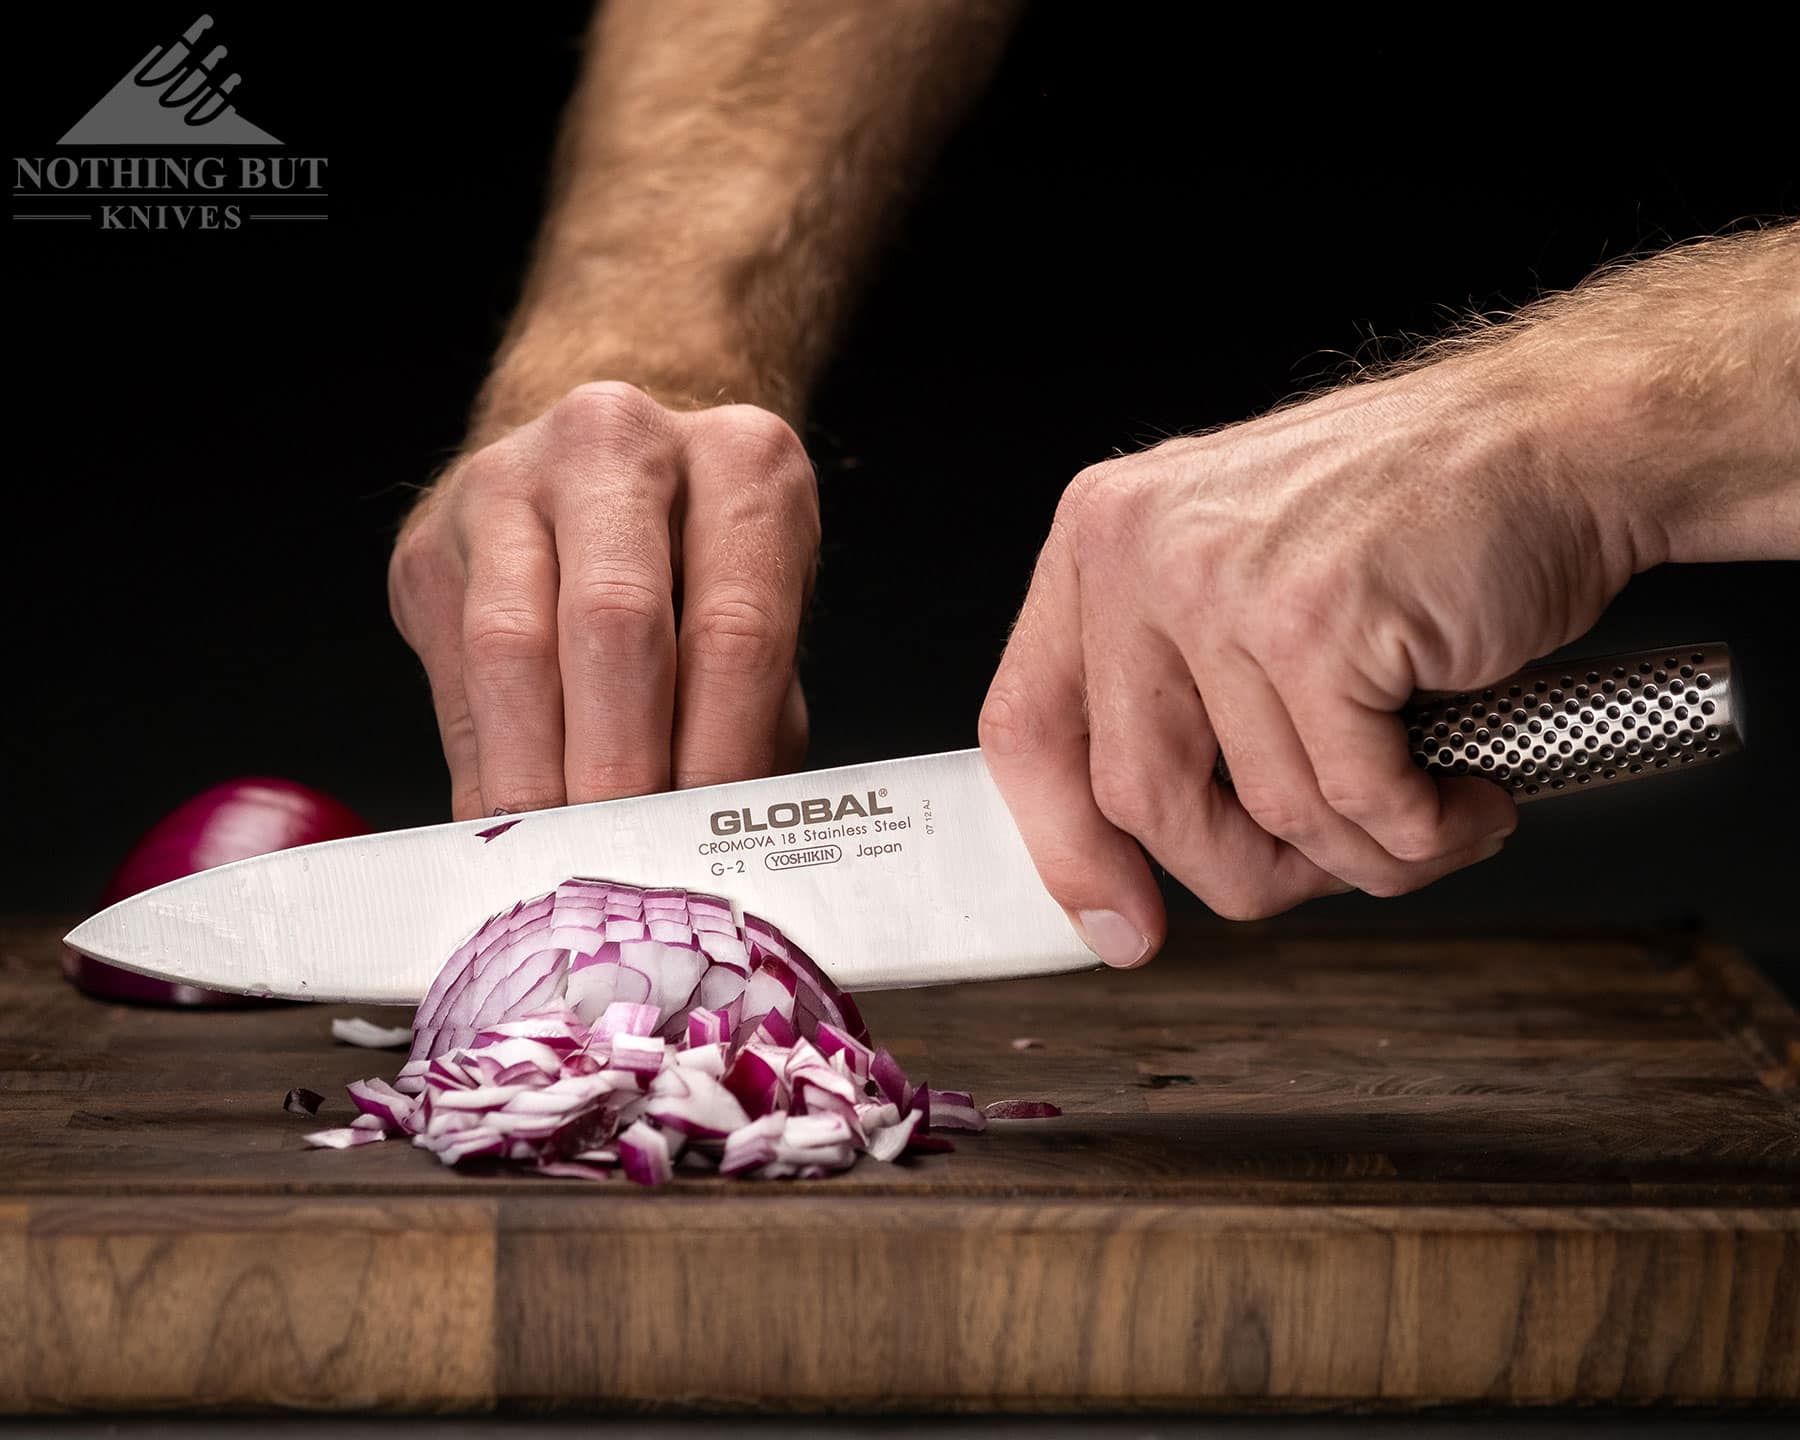 A Global chef knife being used to dice onions to show the knife's blade retention.